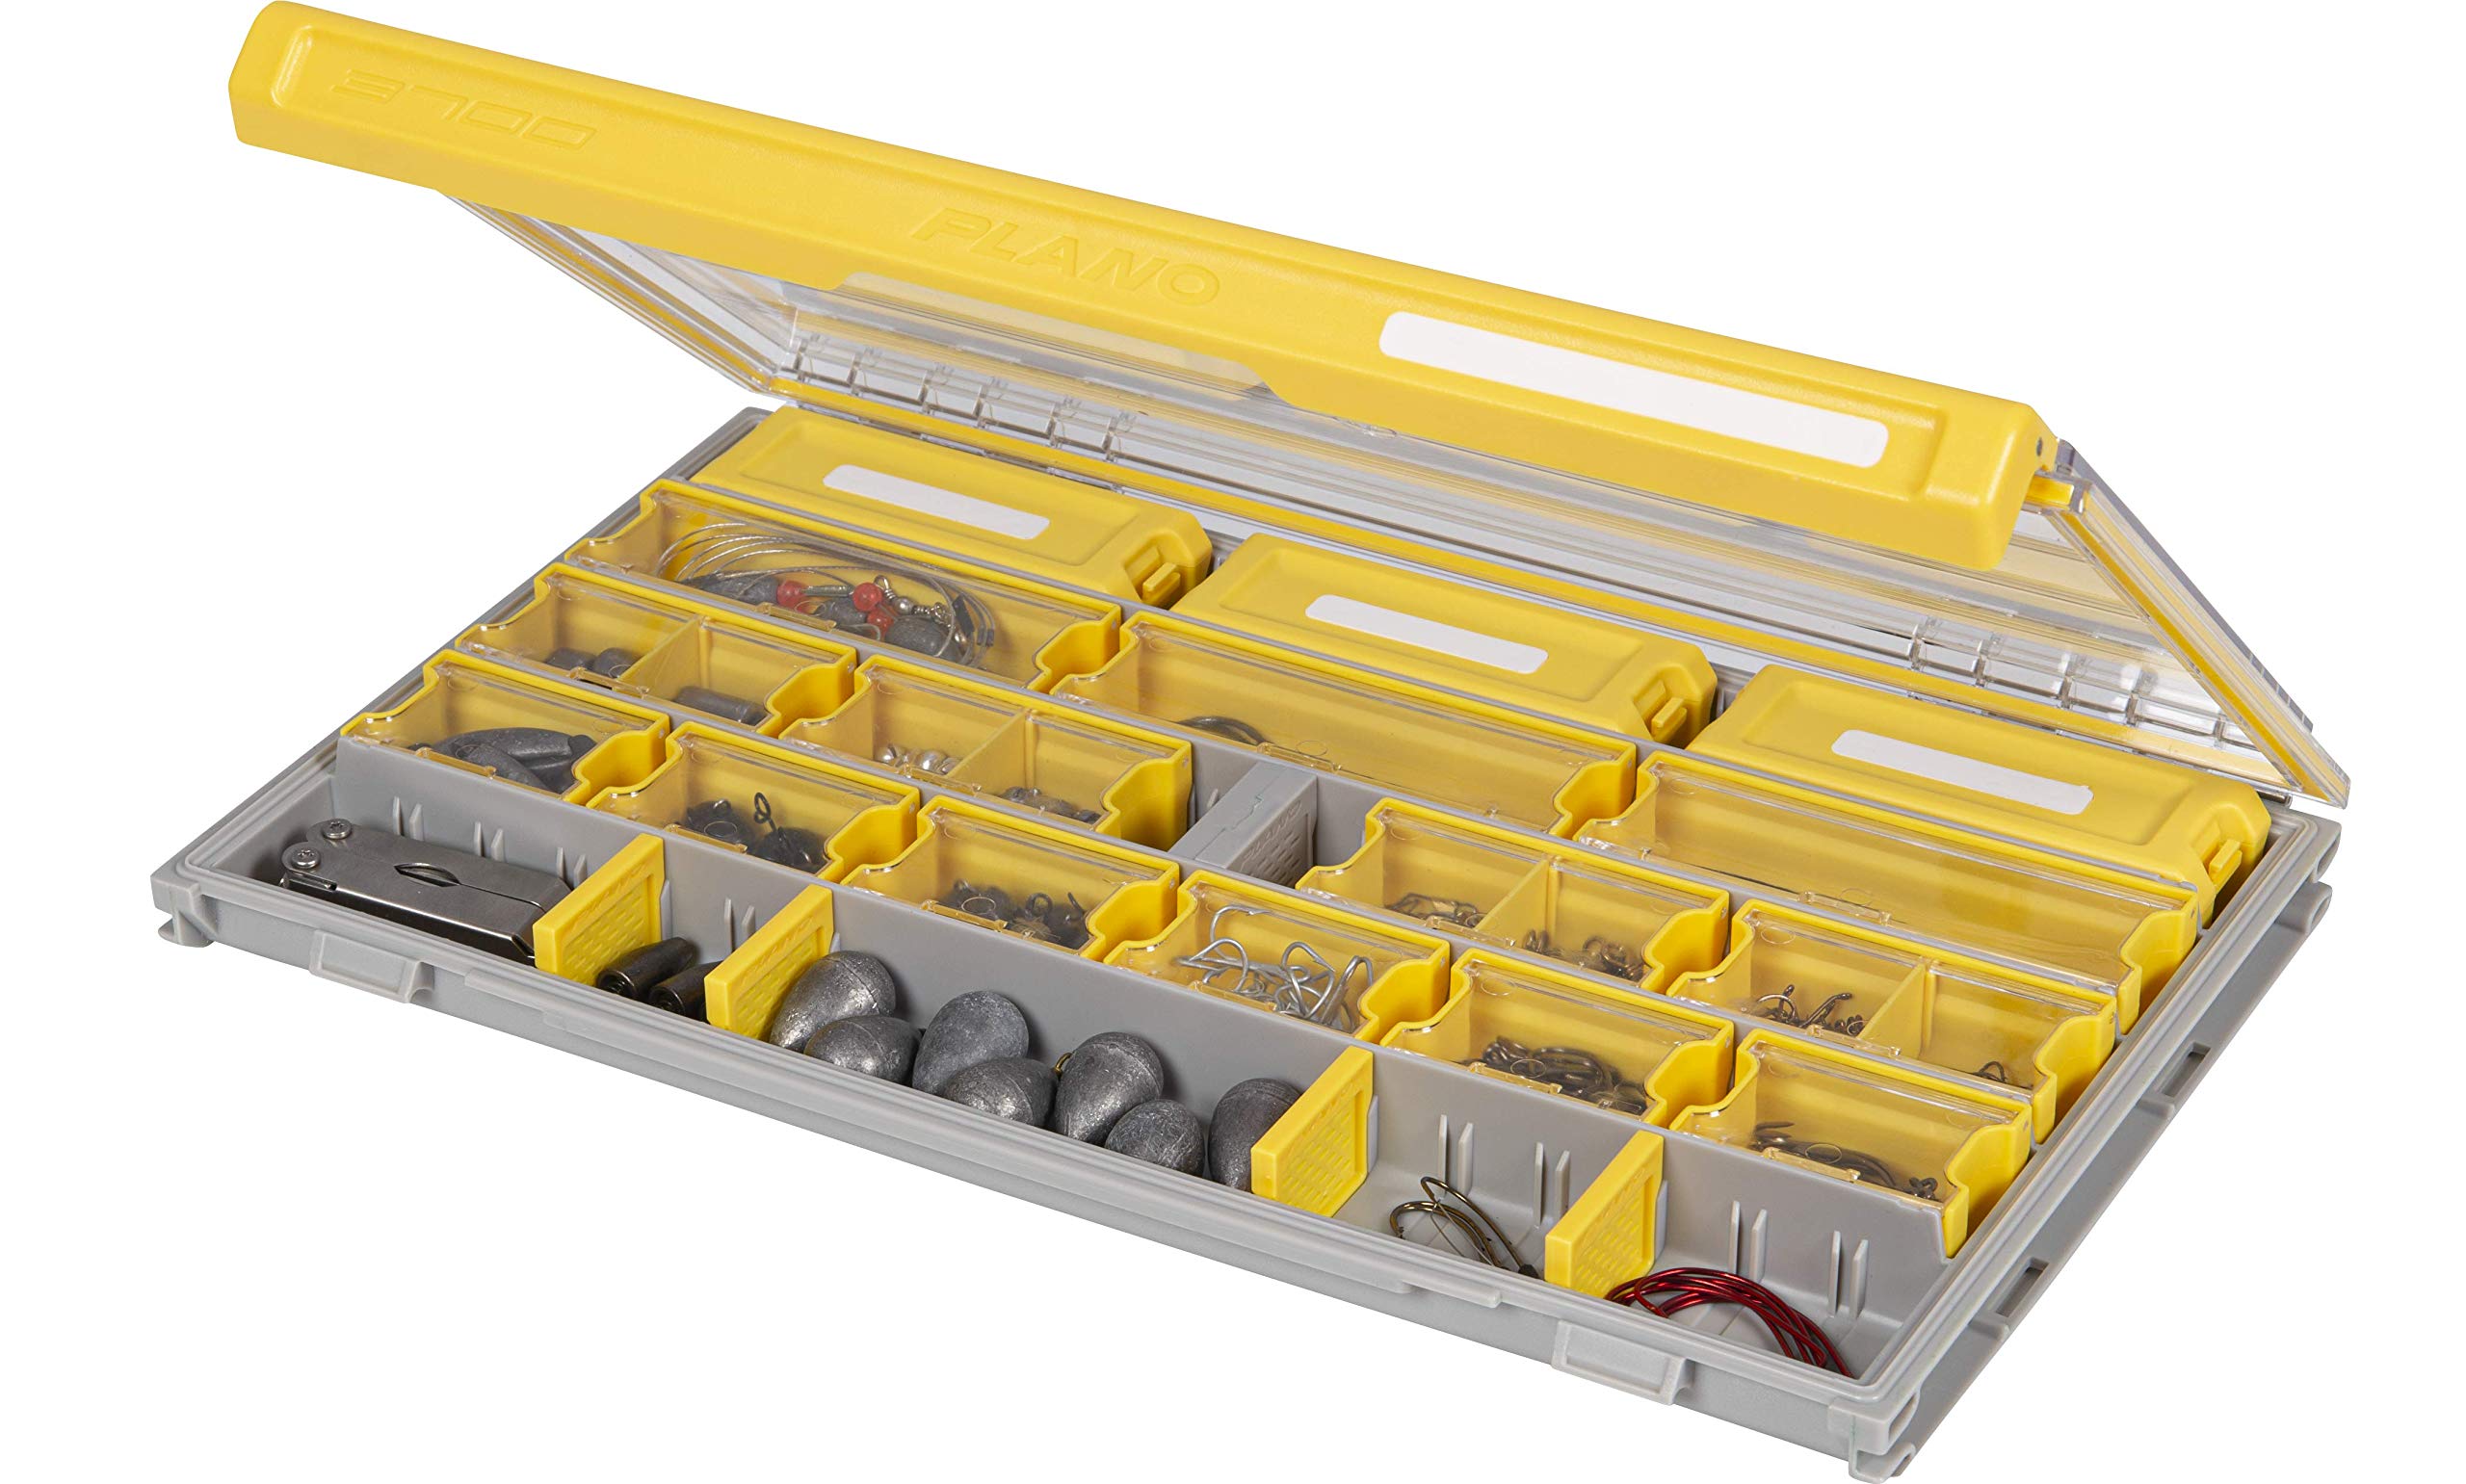 Plano Edge 3600 Terminal Tackle Storage, Gray and Yellow, Includes 10 Hook  Retainers, Rustrictor Rust-Resistant Technology, Waterproof Premium Fishing  Utility Box